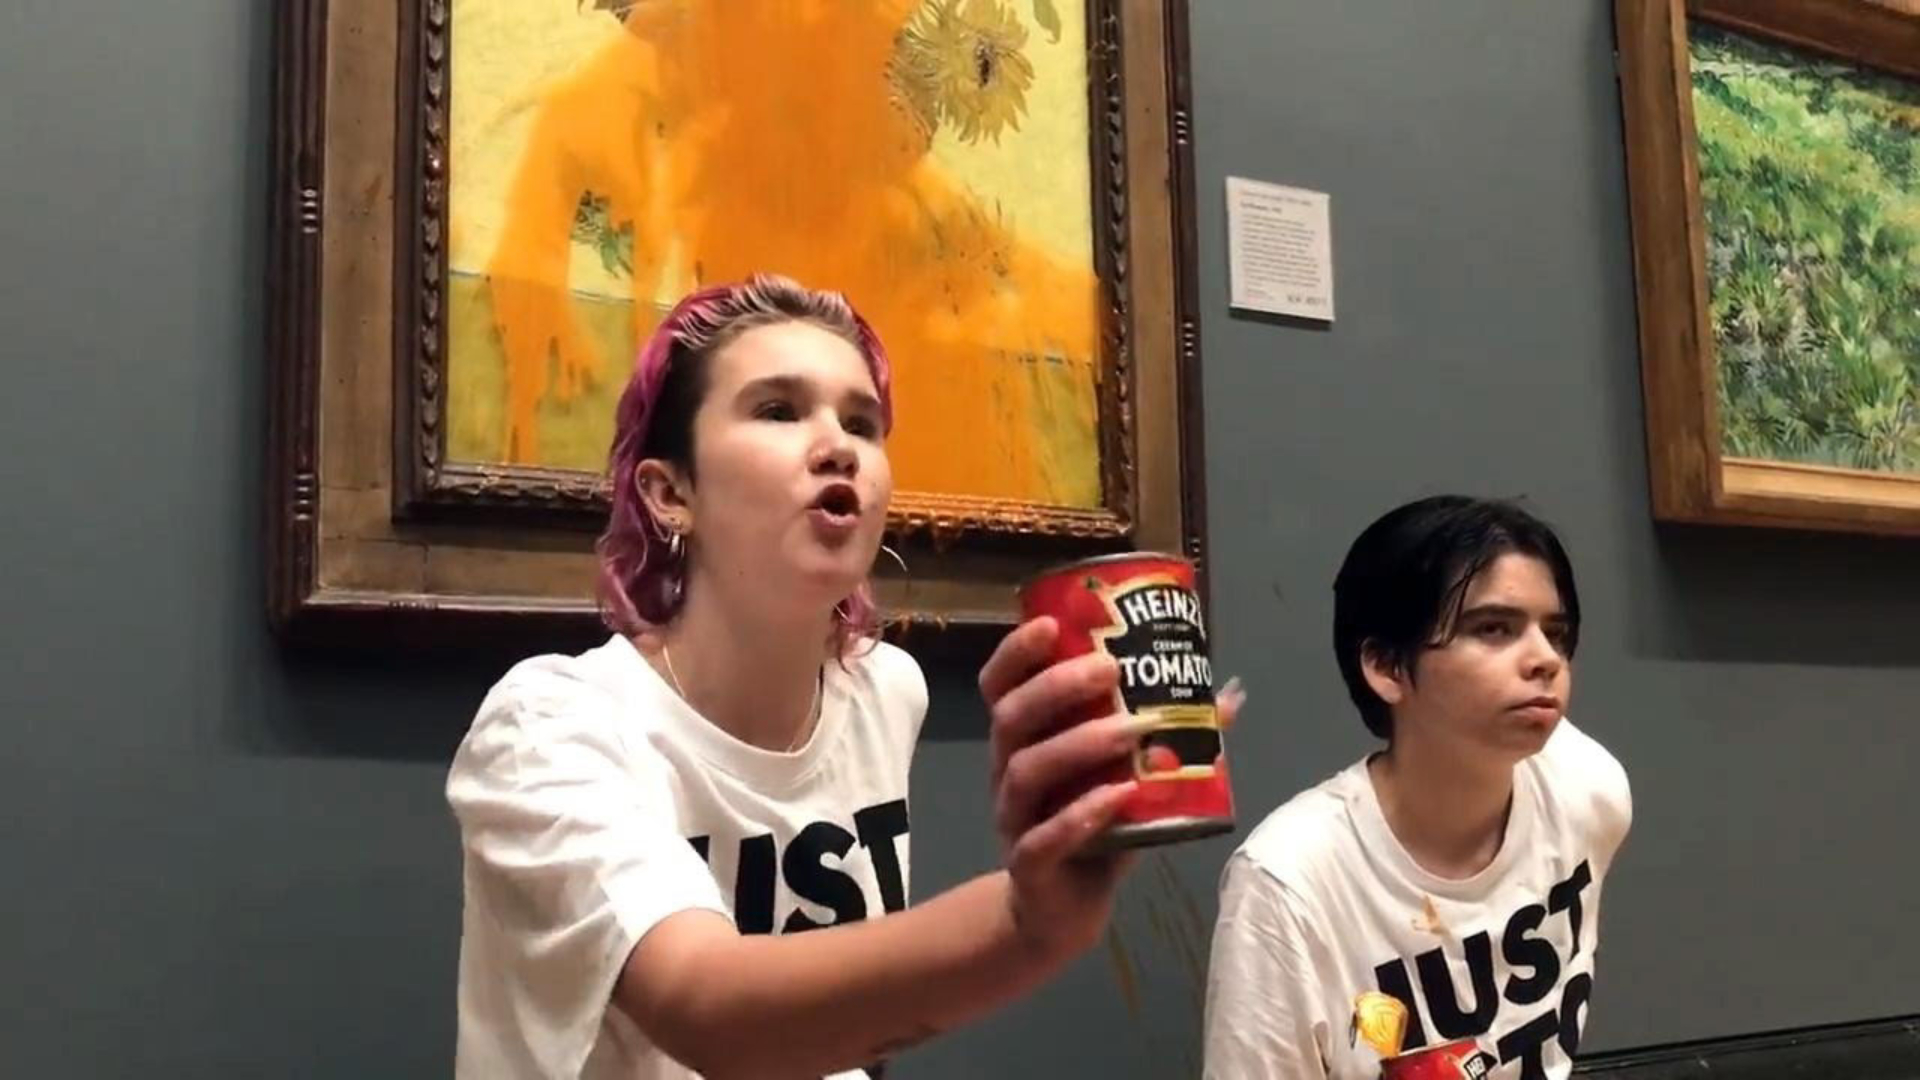 Two supporters of Just Stop Oil threw soup over Vincent Van Gogh’s Sunflowers.